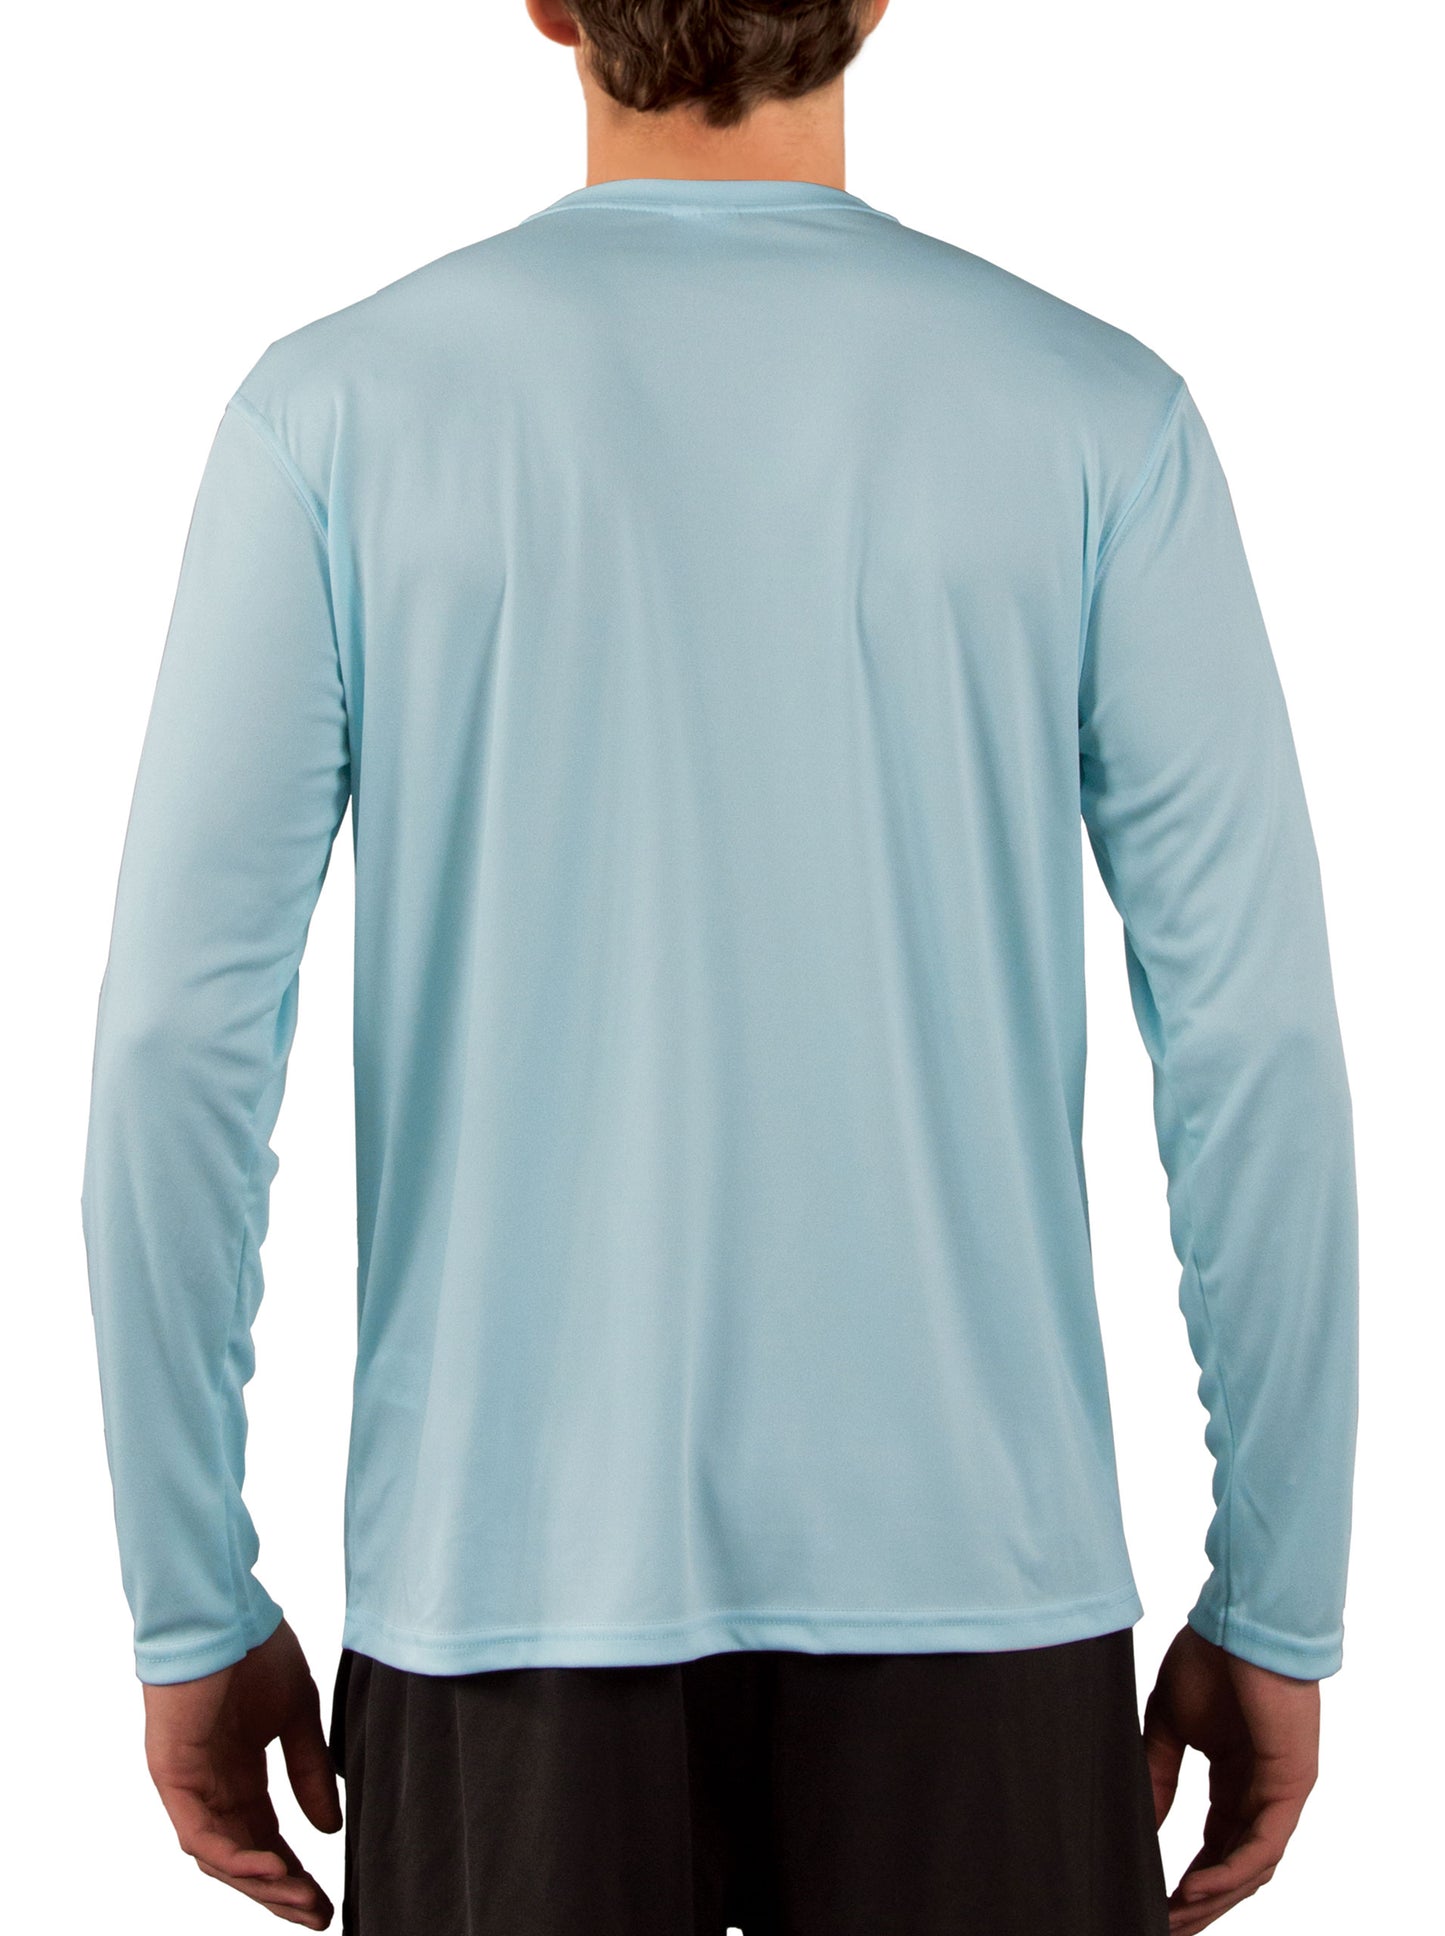 Fishing Shirts for Men - UV Protected +50 Sun Protection with Moisture Wicking Technology - Skiff Life